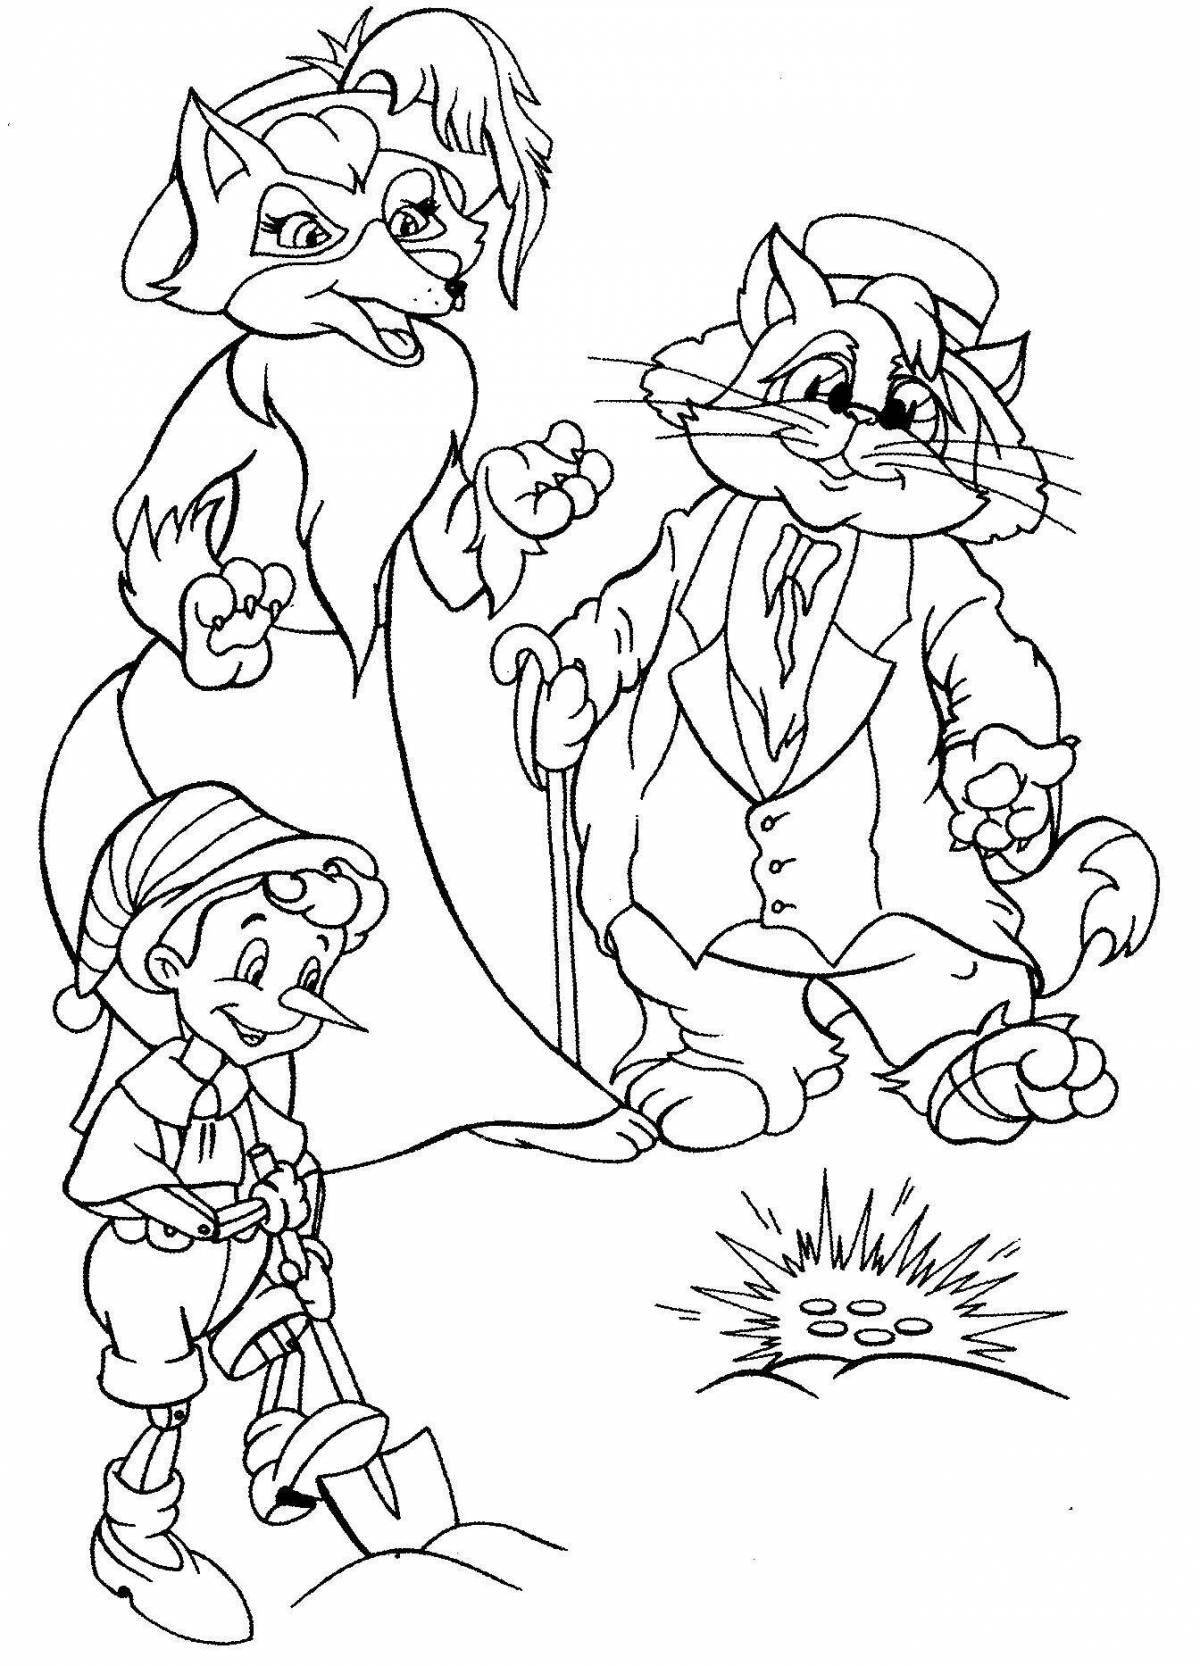 Animated alice fox coloring page